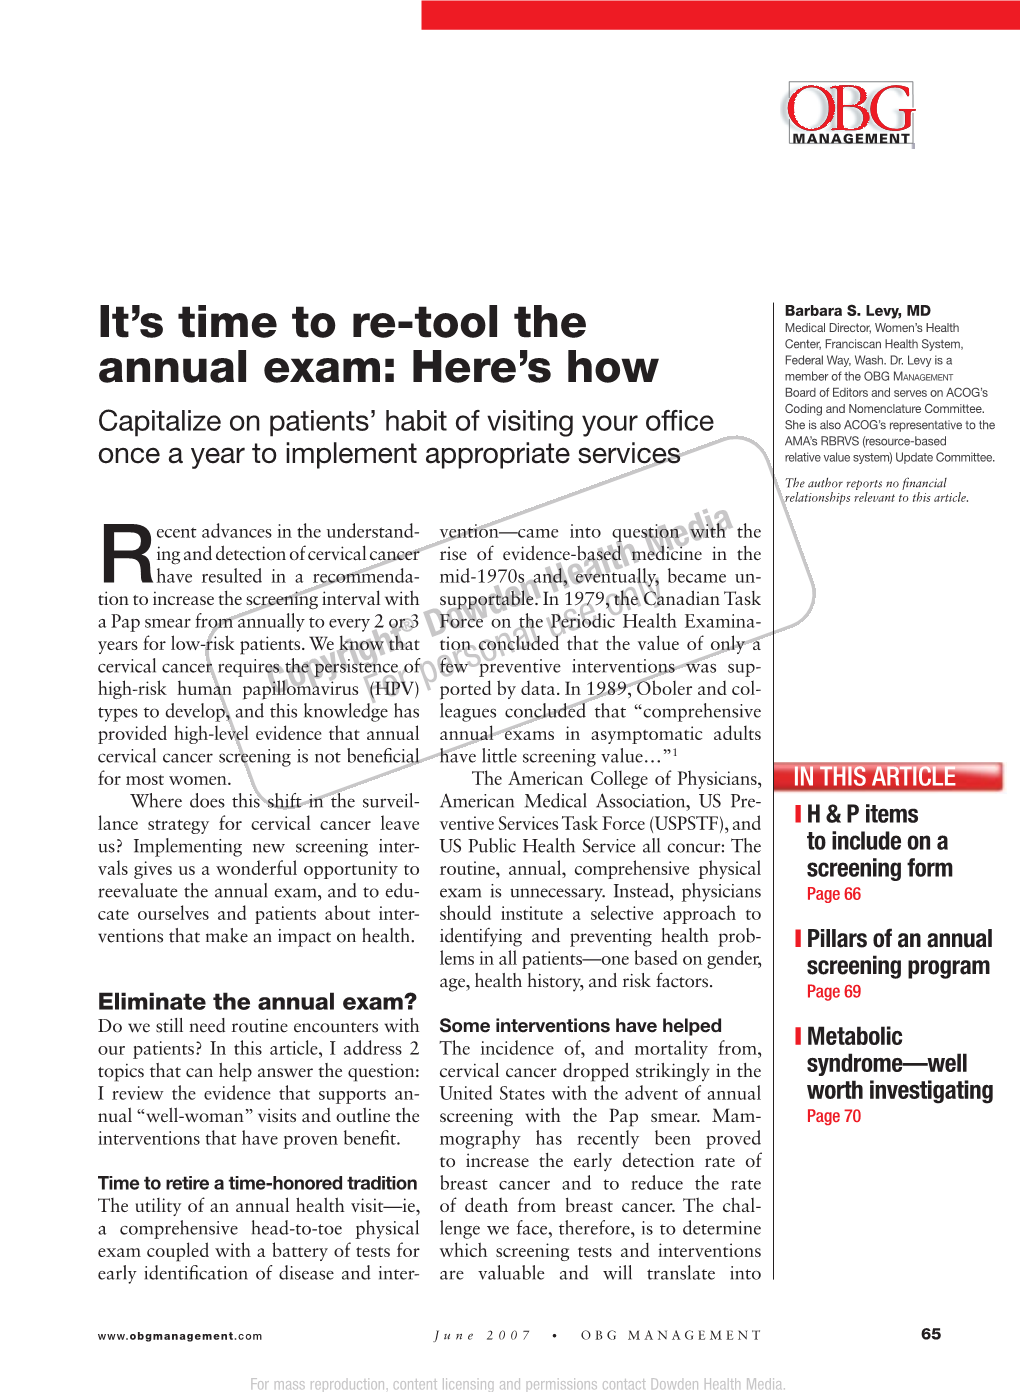 It's Time to Re-Tool the Annual Exam